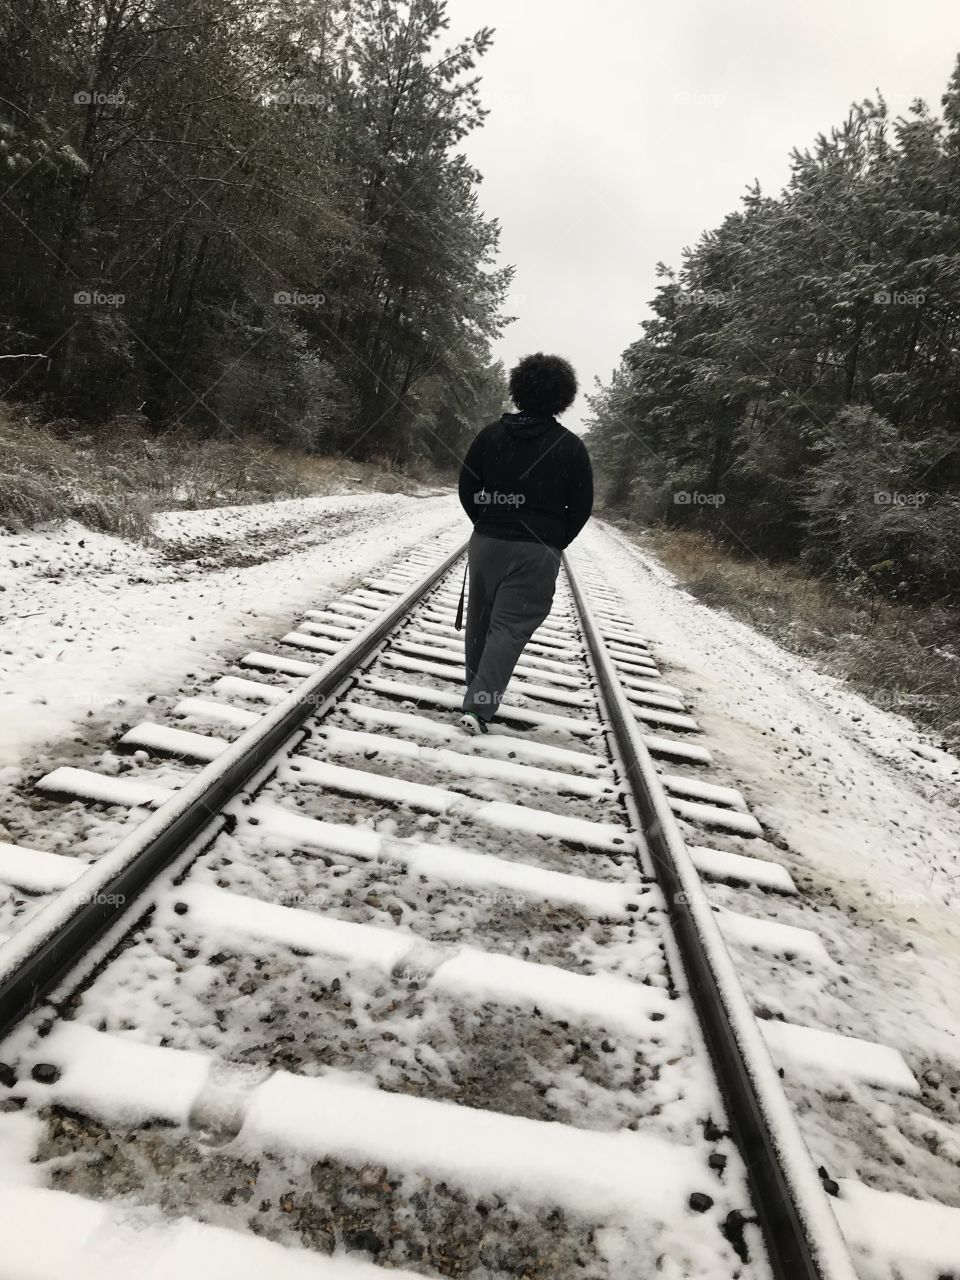 Railroad tracks covered in snow!